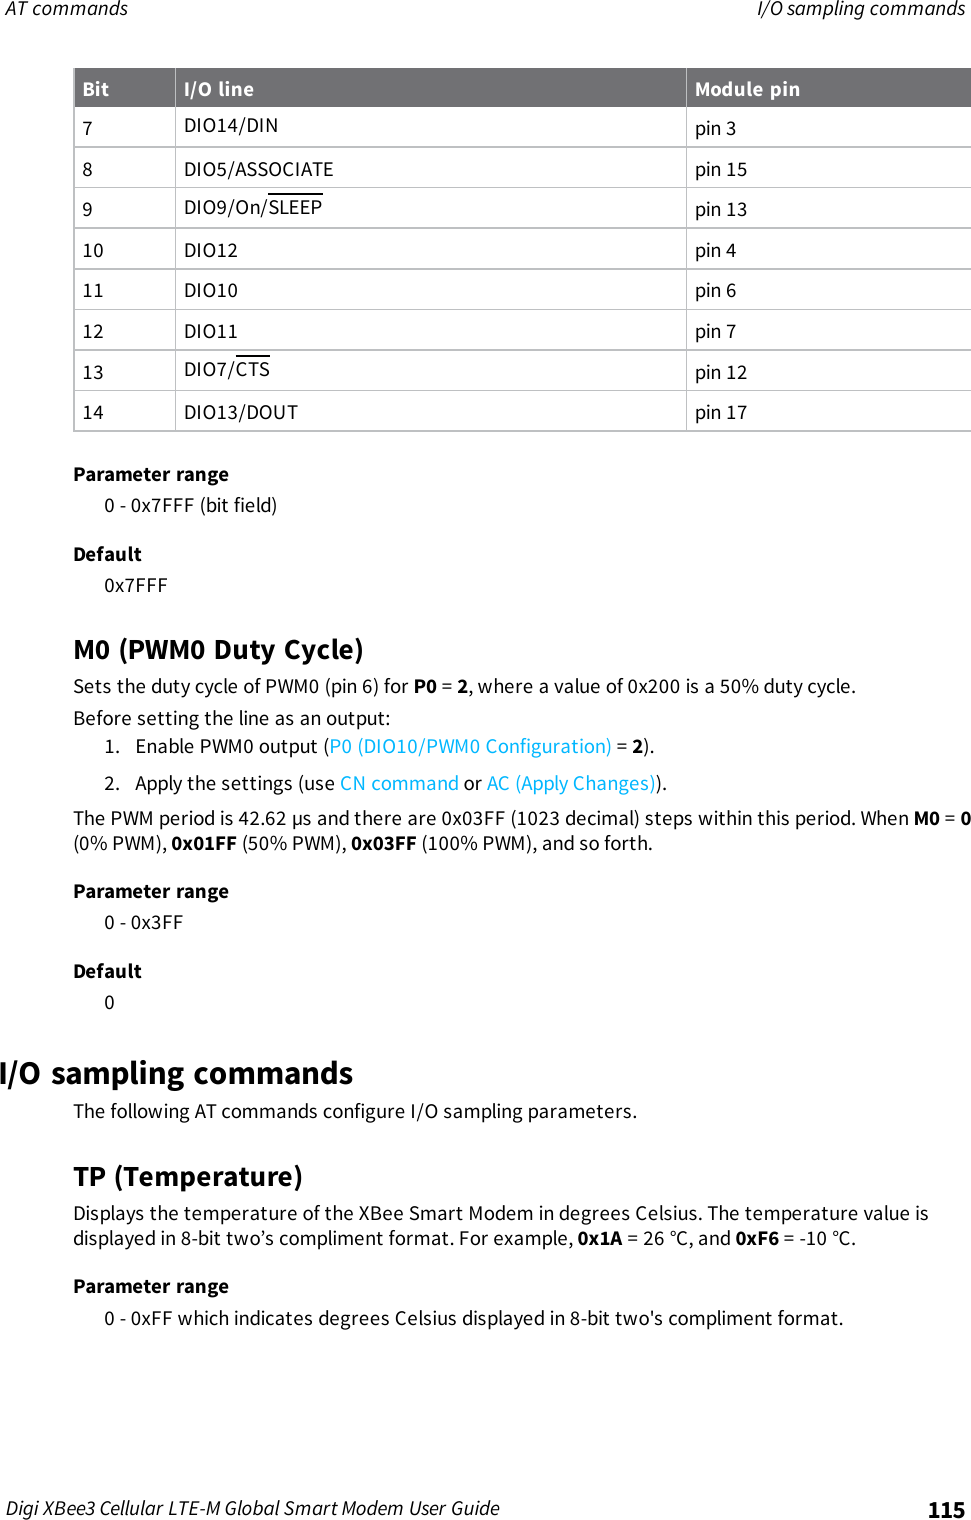 Page 115 of Digi XB3M1 XBee3 Cellular LTE-M User Manual 